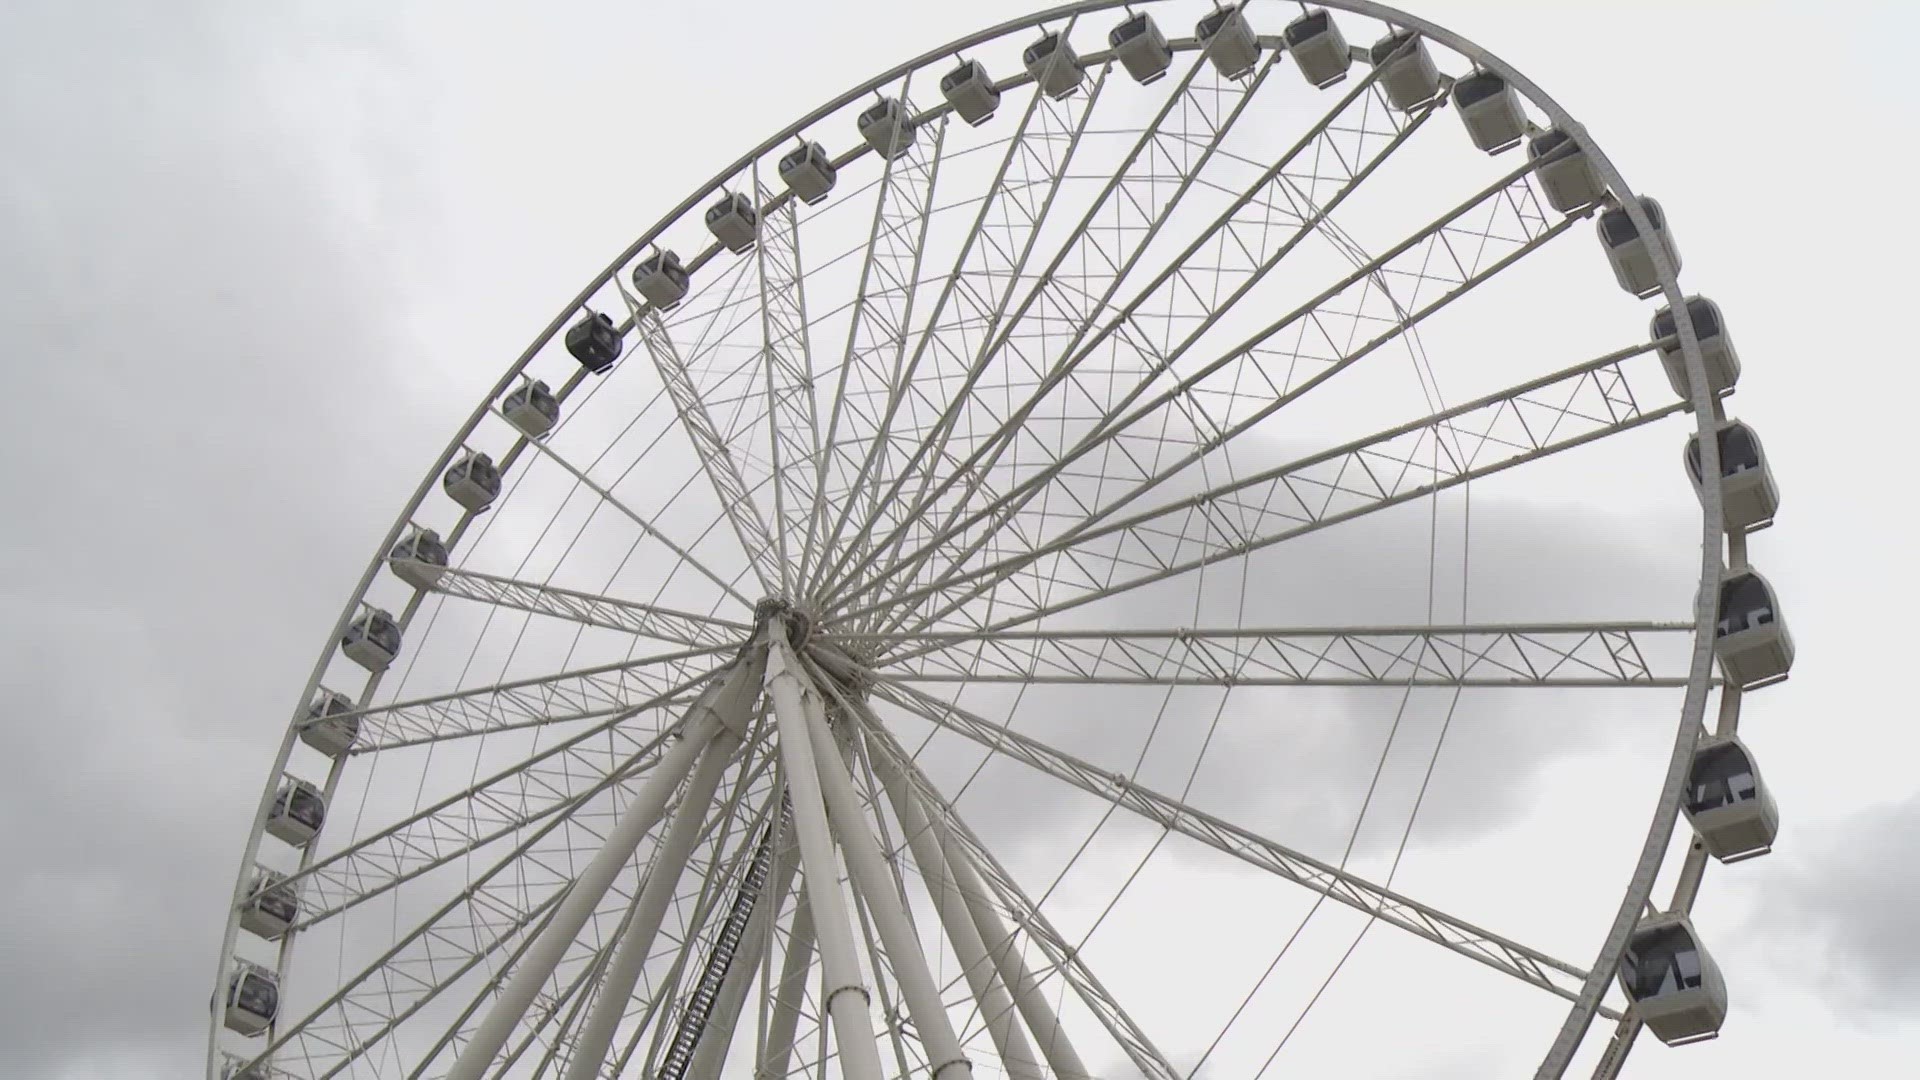 Dogs can ride for free with their humans who have paid for a ticket on the St. Louis Wheel, from 10 a.m. to 10 p.m. Monday, Aug. 28.